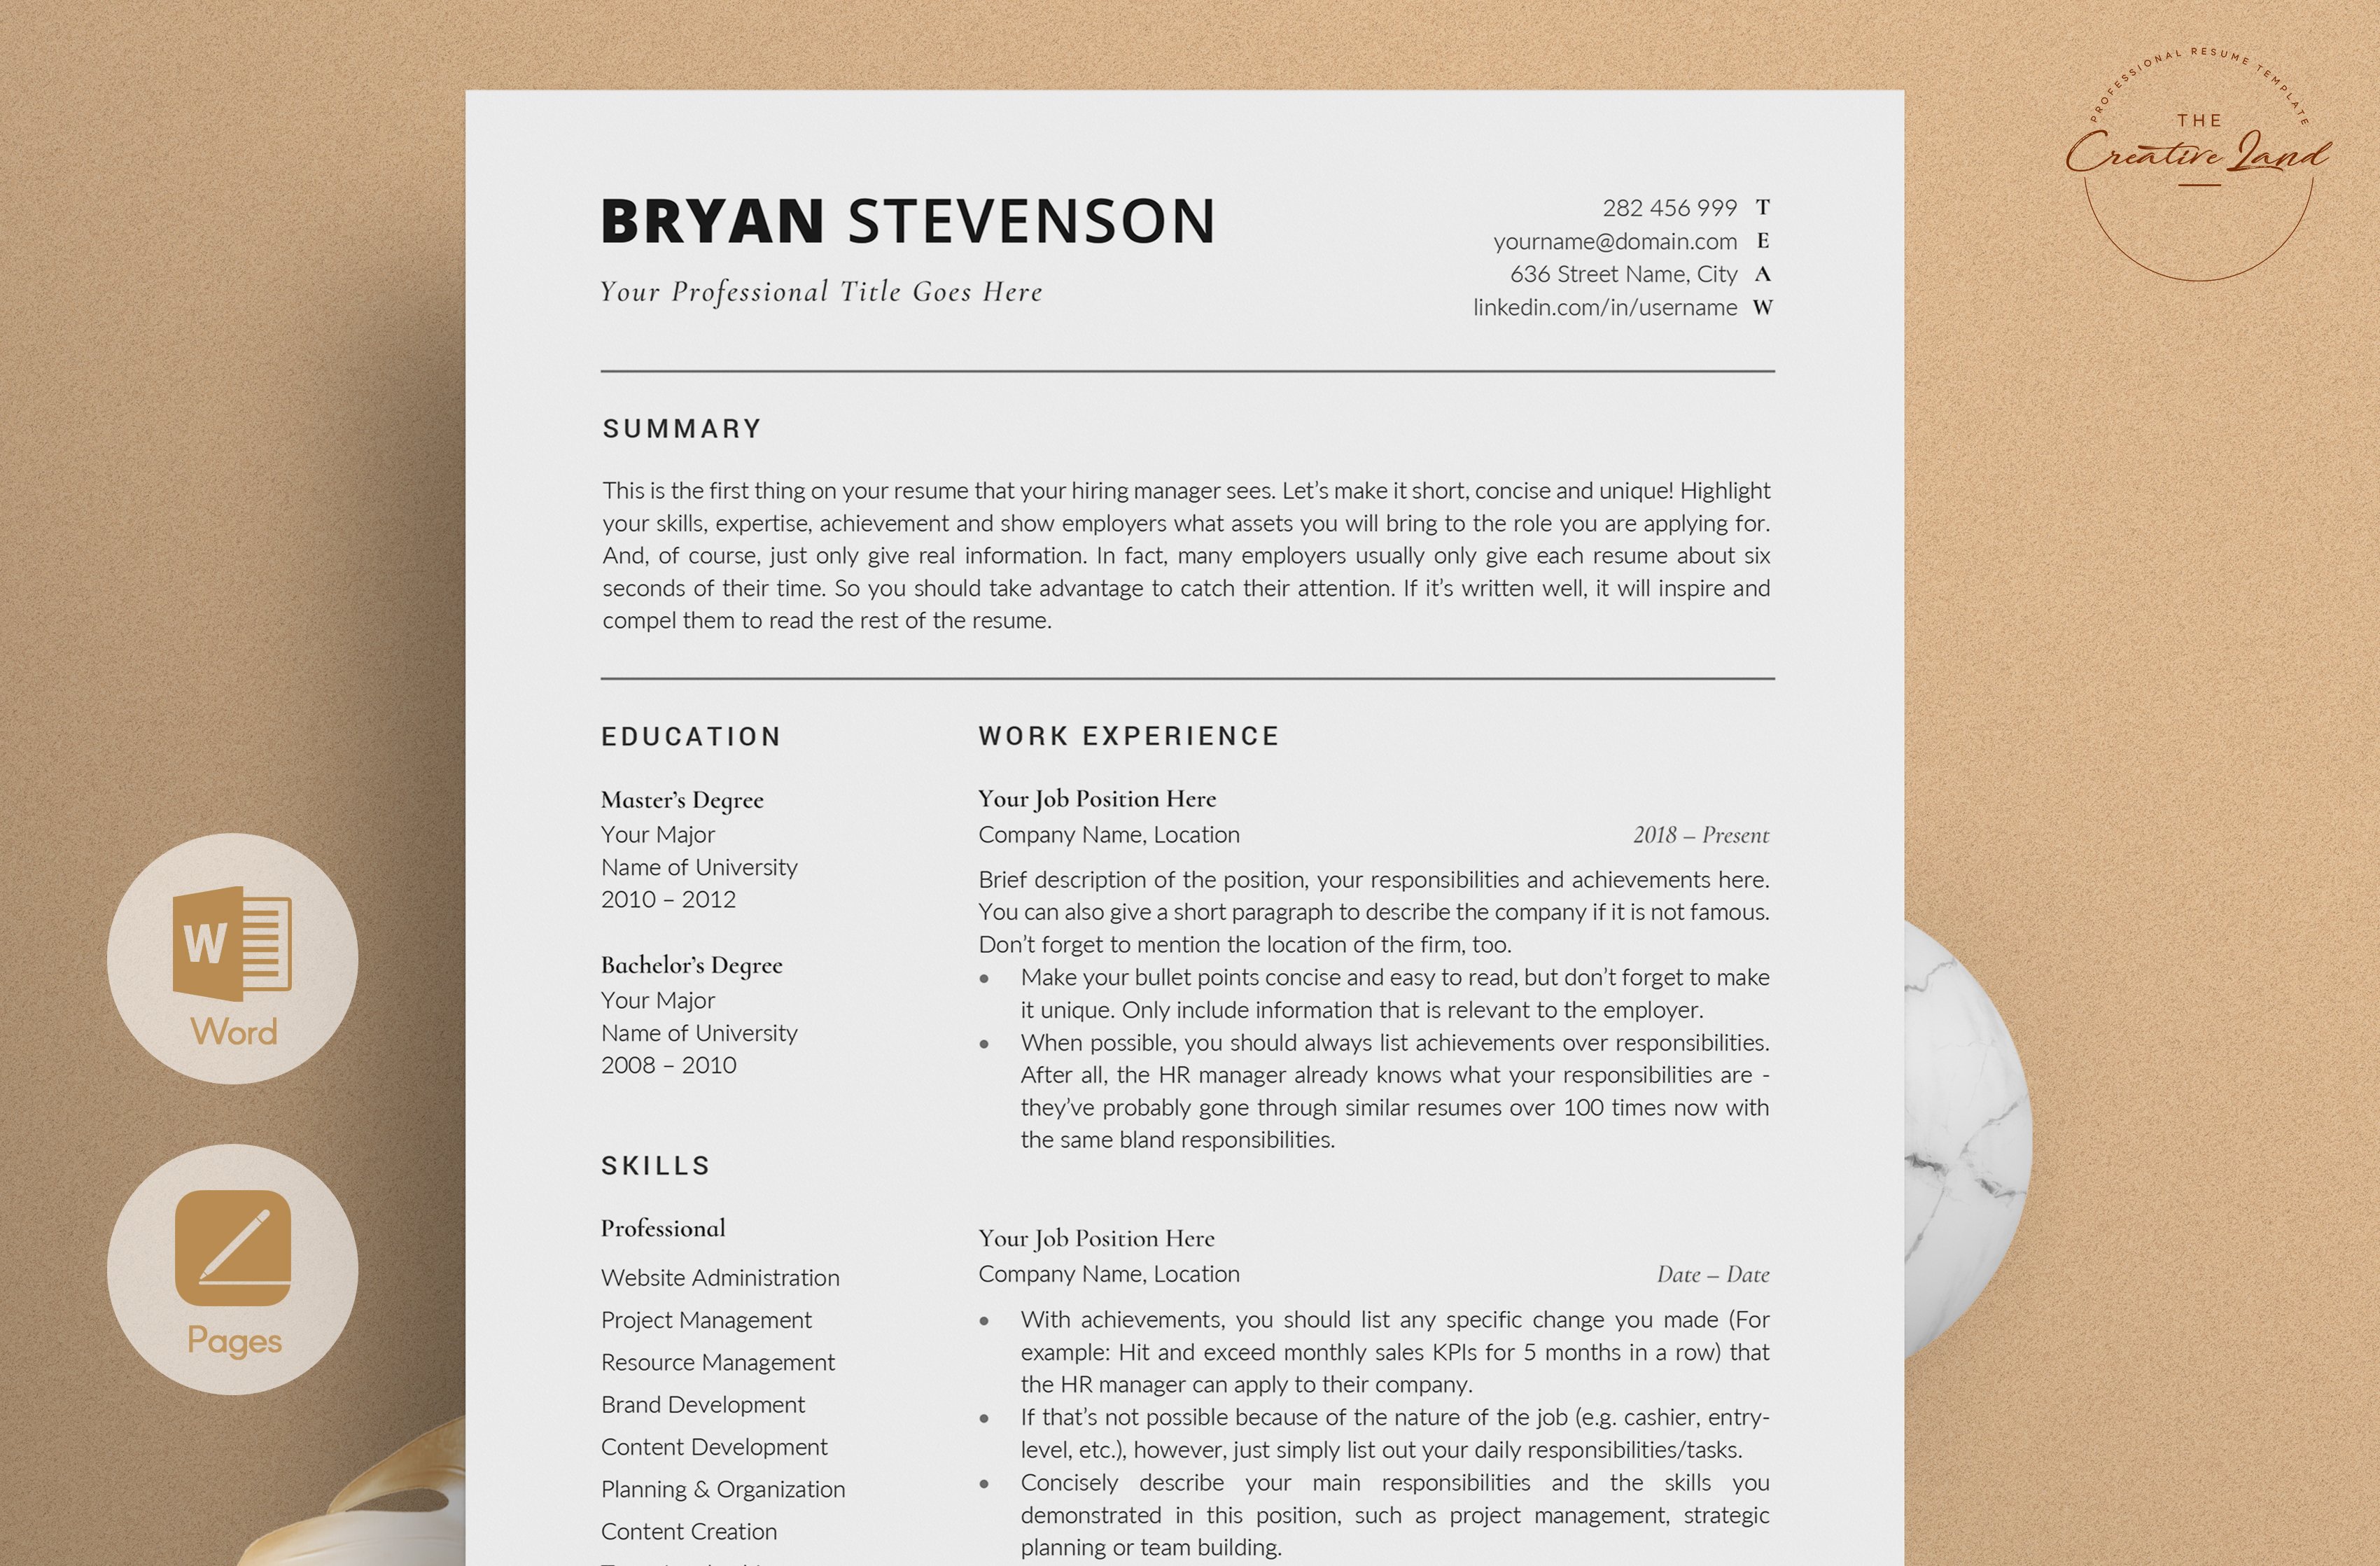 Resume/CV - The Bryan cover image.